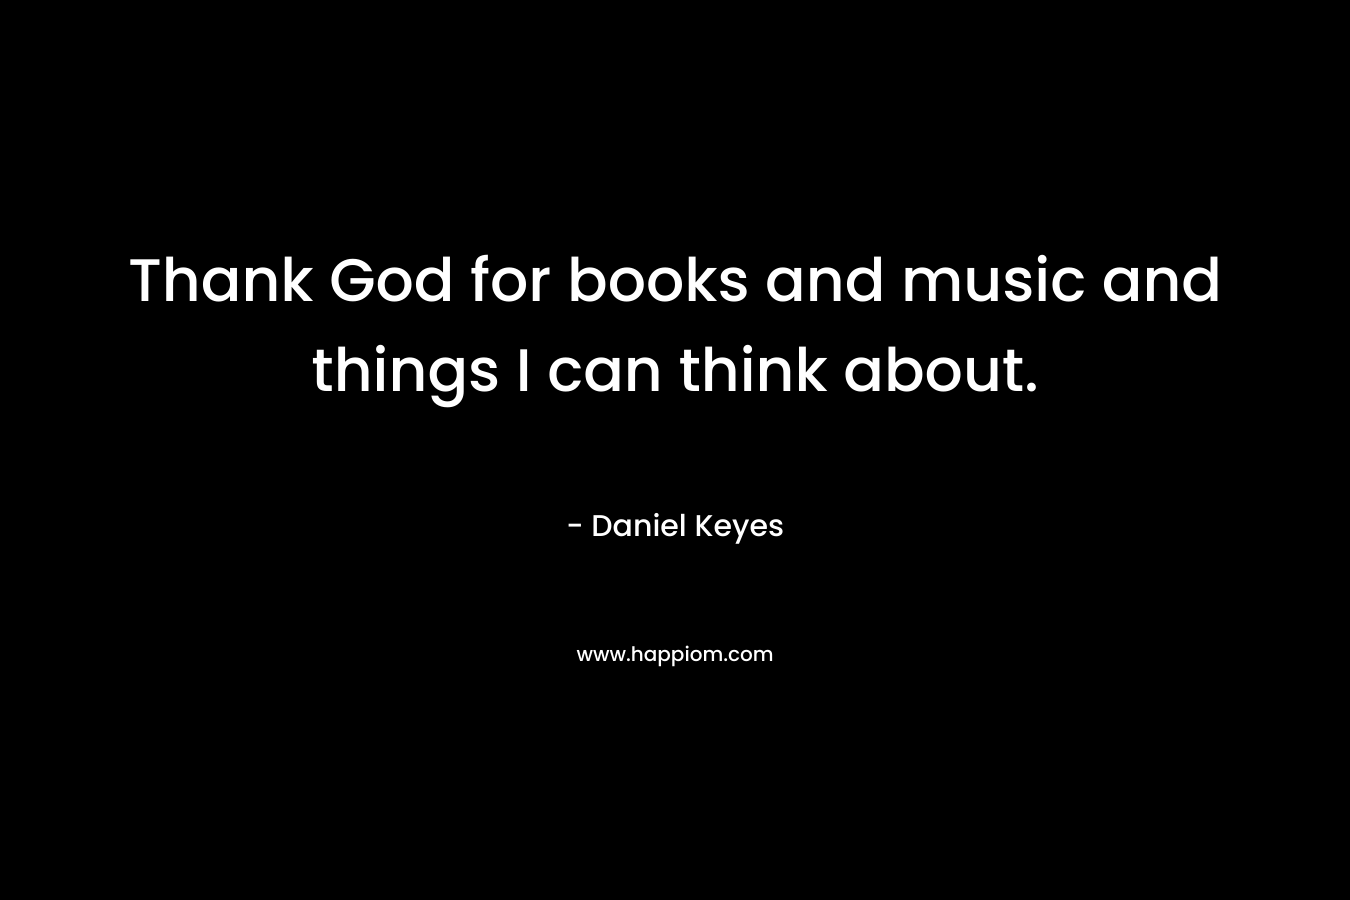 Thank God for books and music and things I can think about.